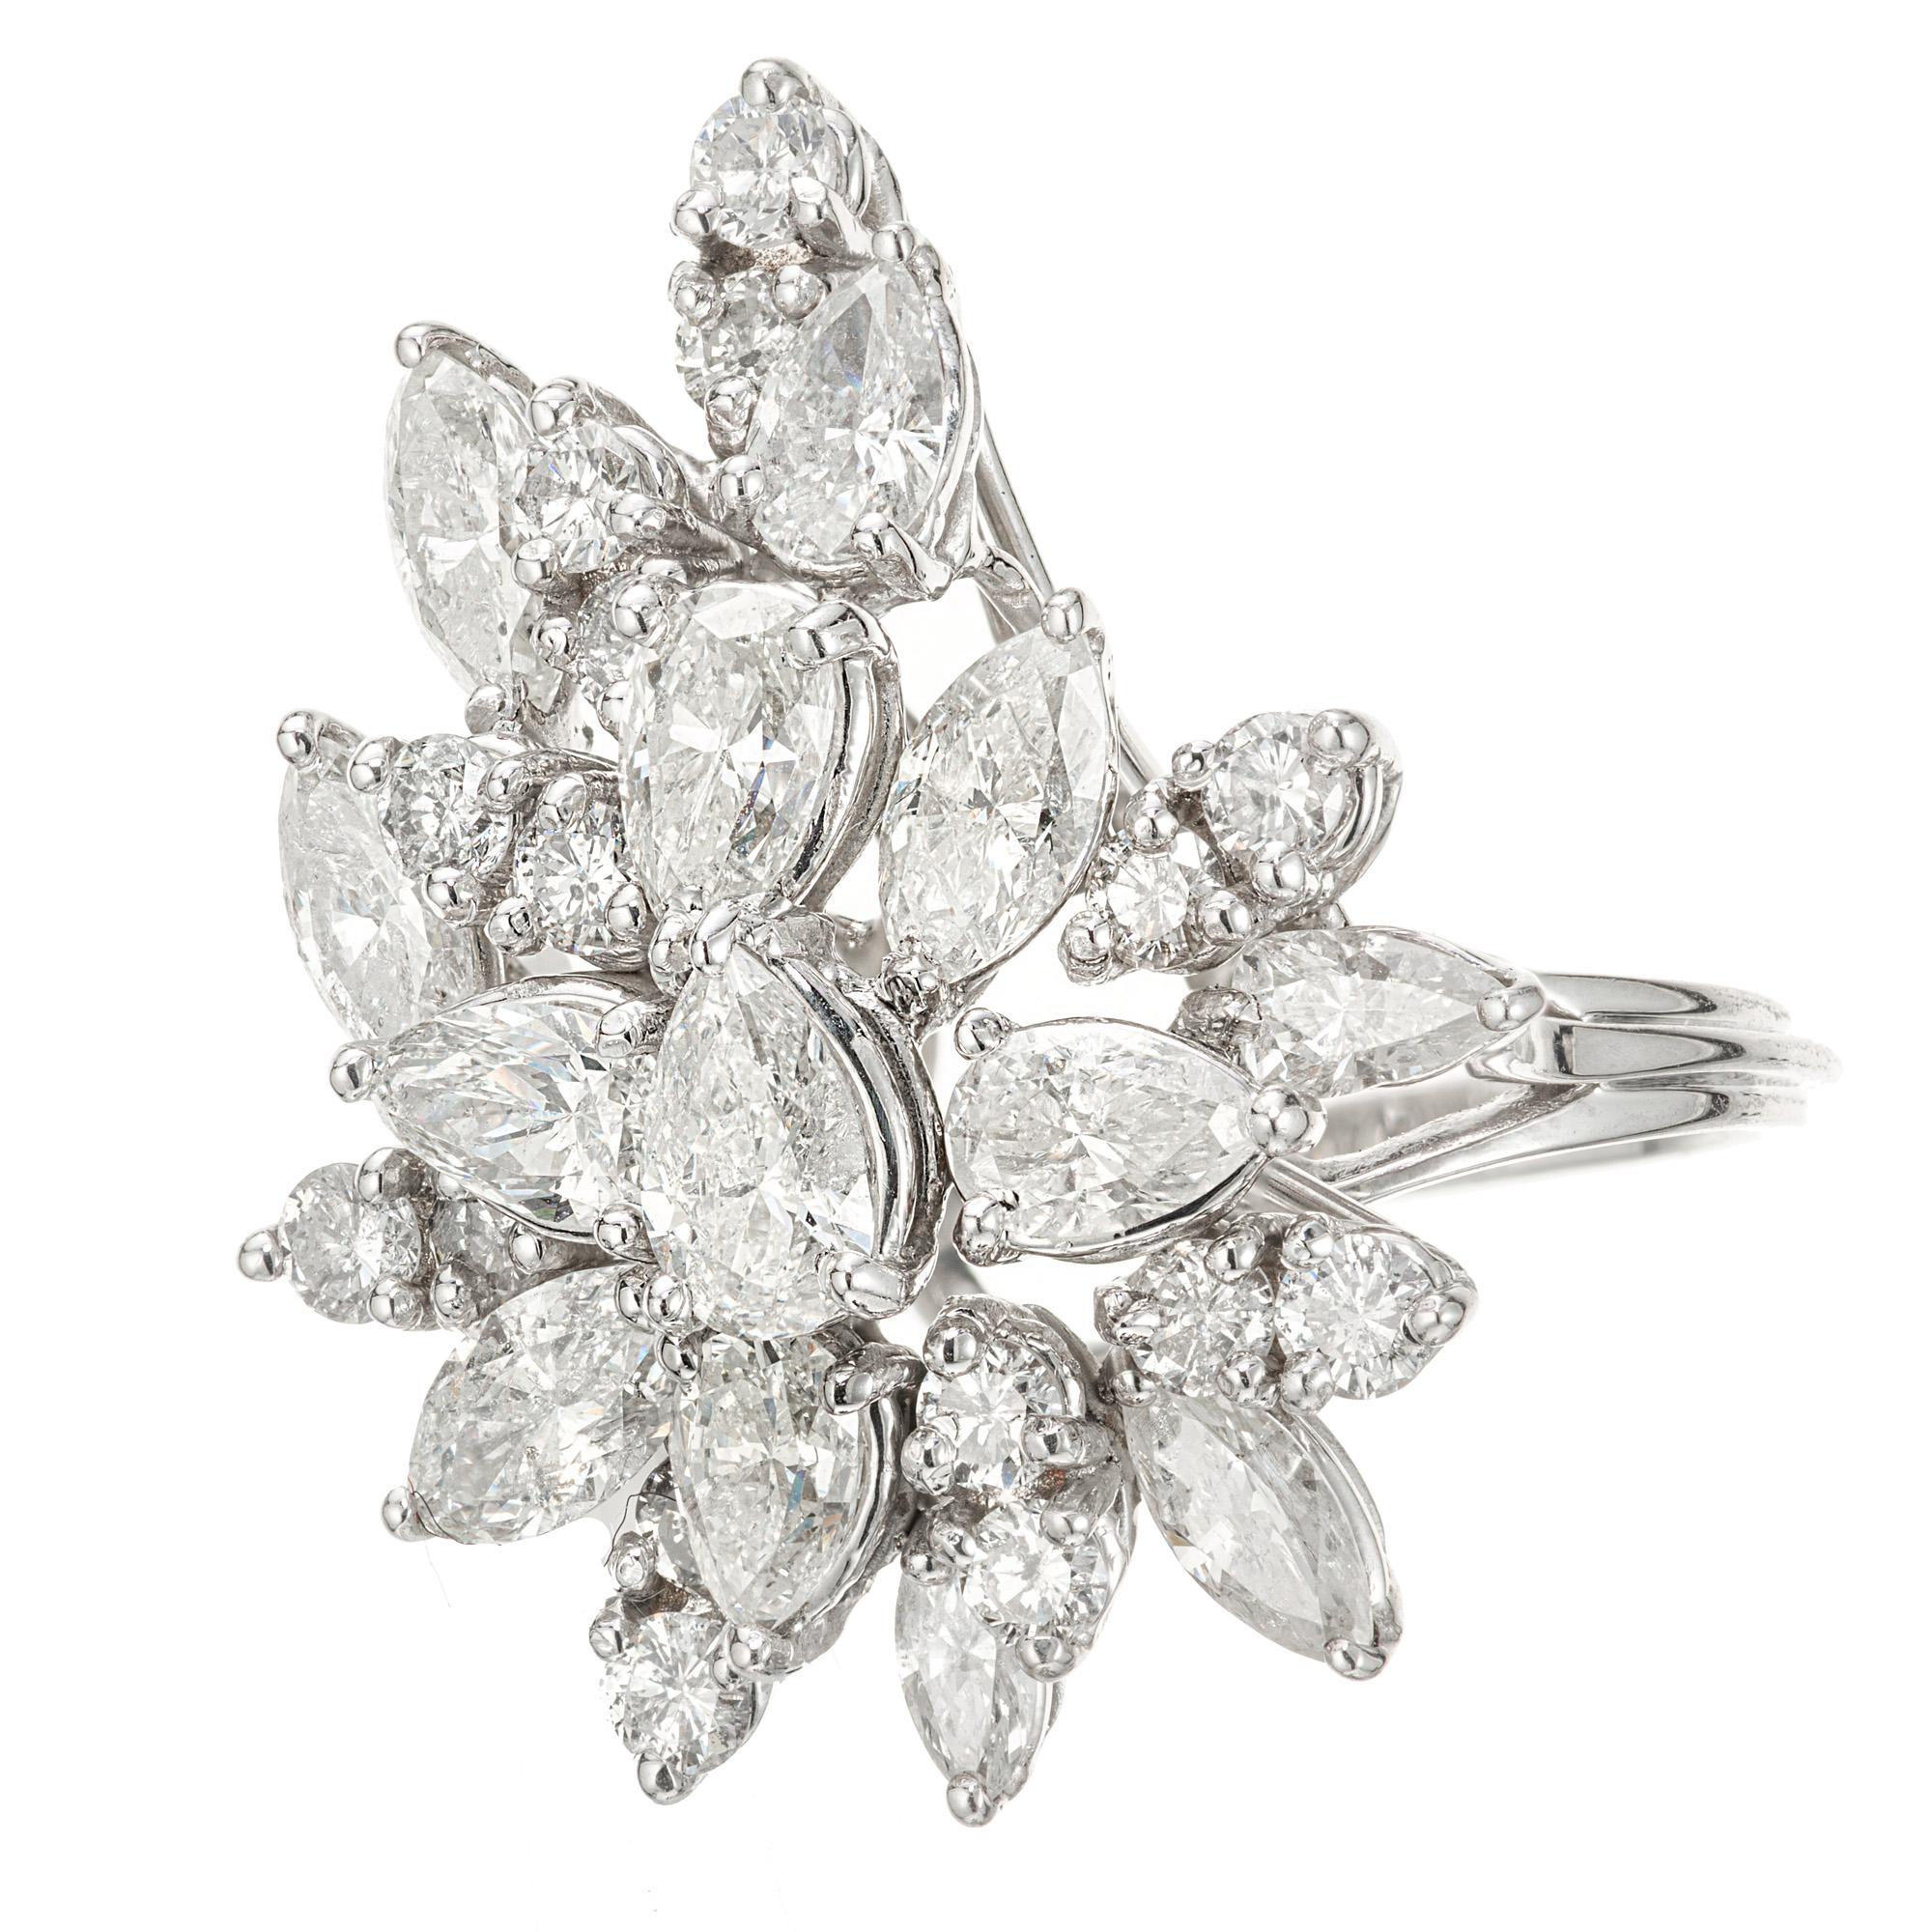 1950's classic example of a diamond cluster cocktail ring. 7 pear shaped, 6 Marquise shaped and 16 round shaped diamonds set in a platinum cocktail ring setting. 

7 pear shape diamonds, I-J-K I approx. 2.10cts
6 marquise diamonds, I-J-K I approx.